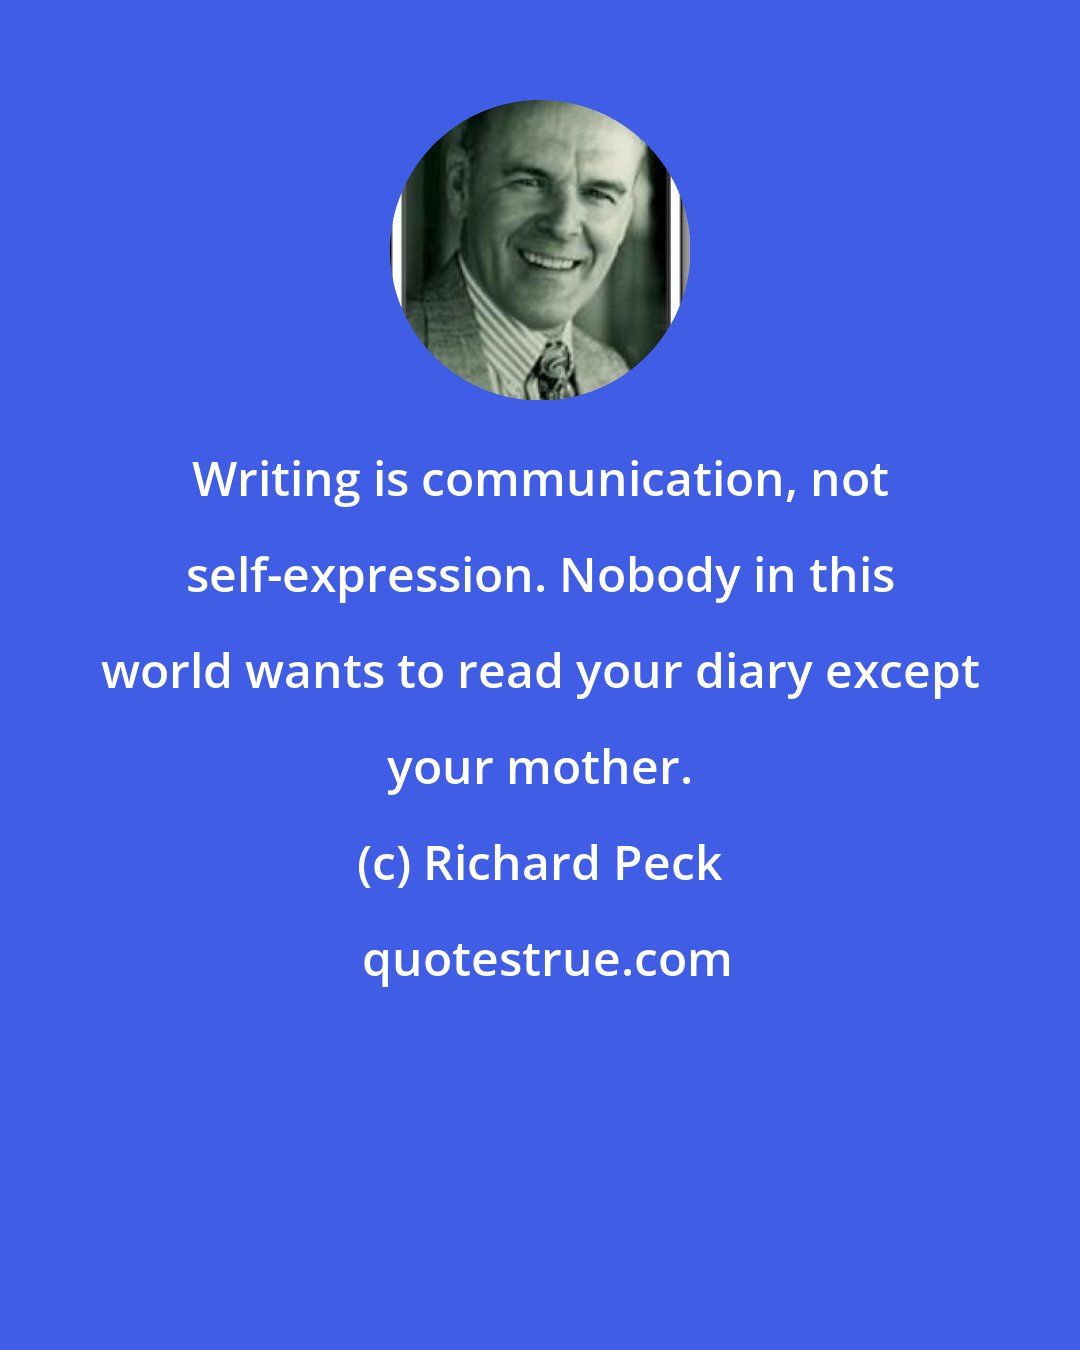 Richard Peck: Writing is communication, not self-expression. Nobody in this world wants to read your diary except your mother.